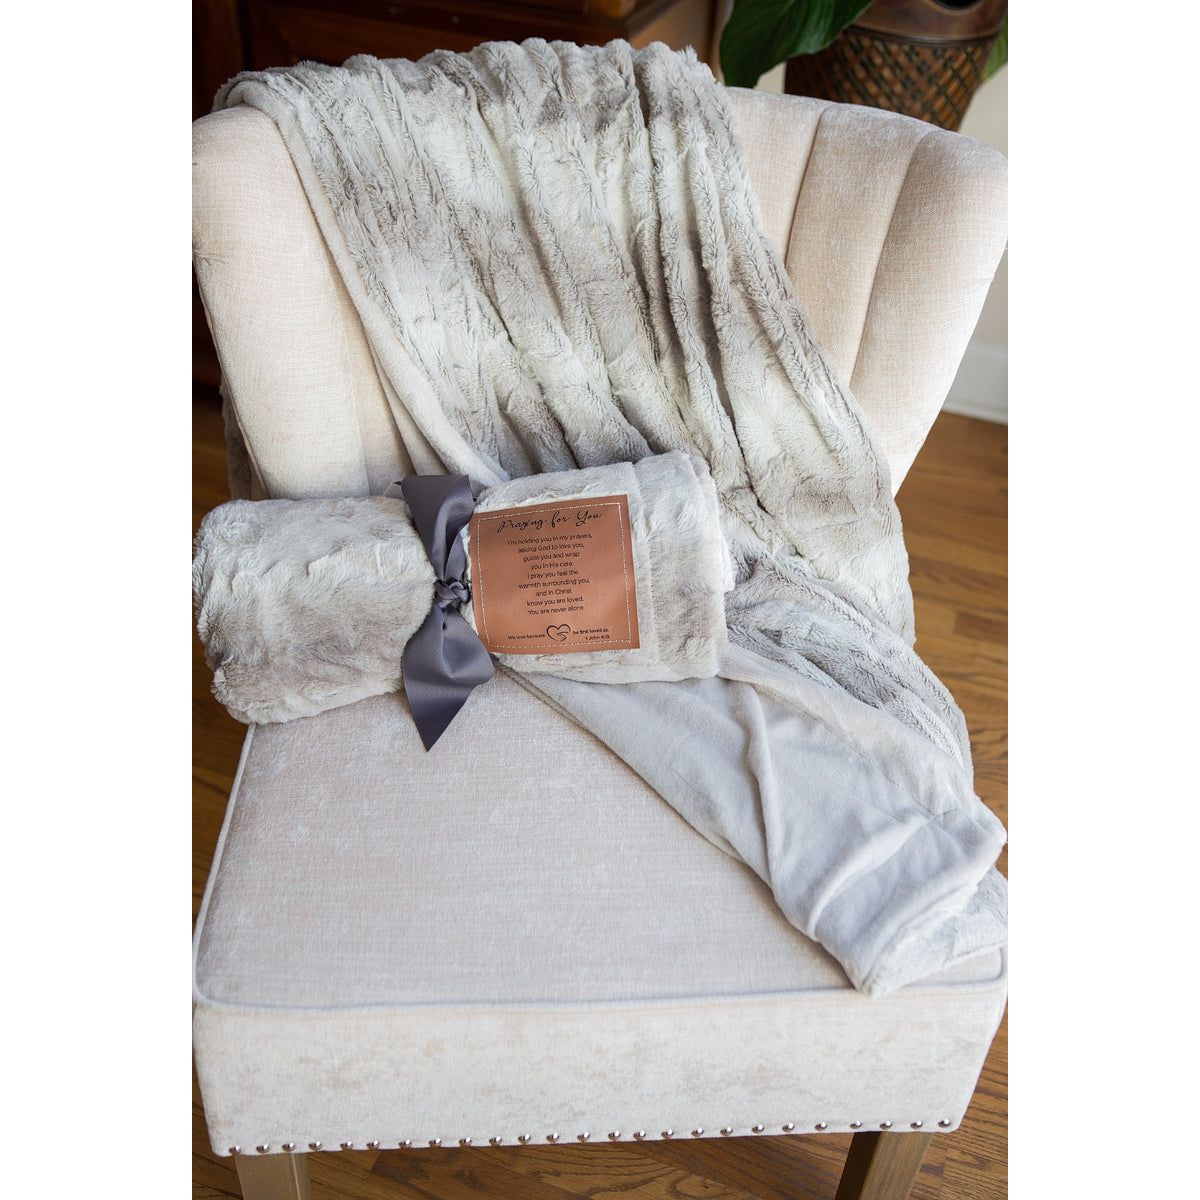 Sympathy blanket rolled and tied with a ribbon on a chair on top of another blanket draped over the chair.